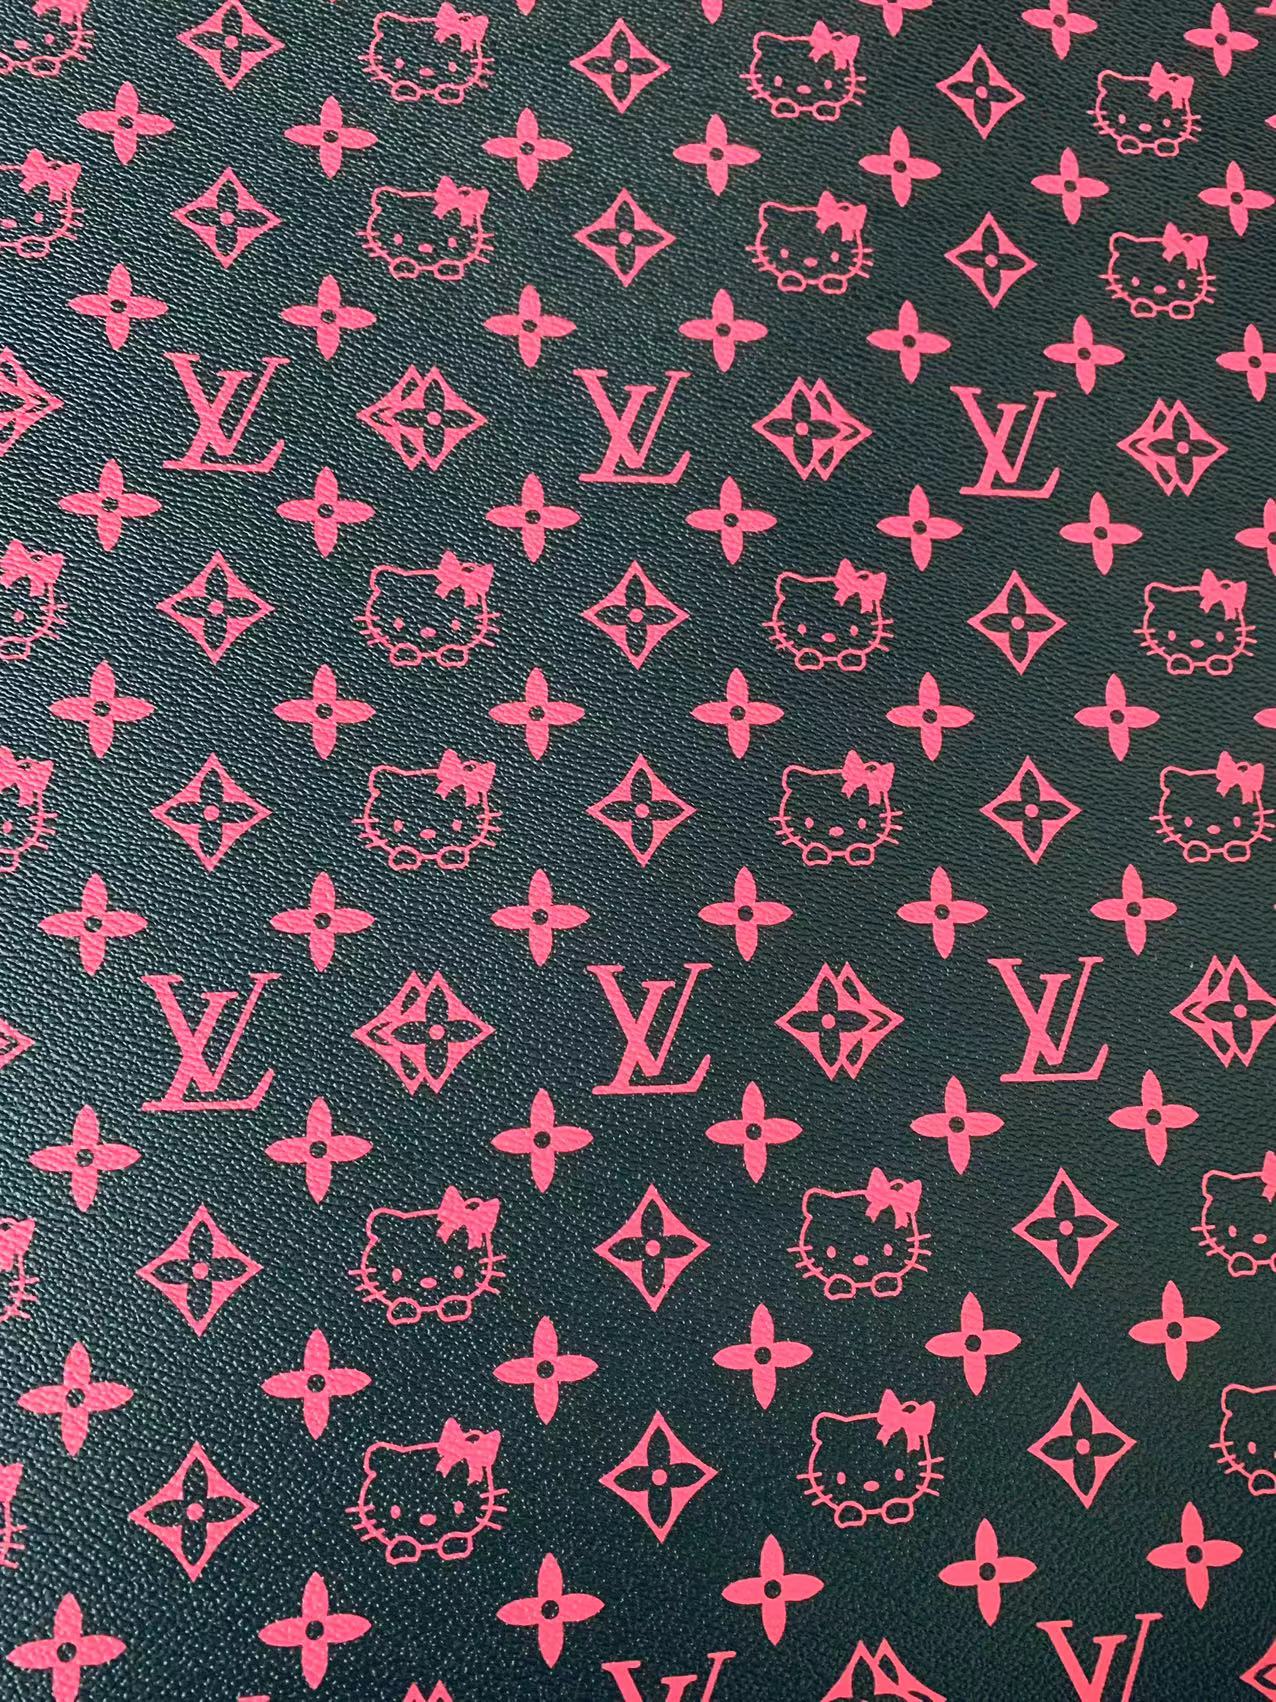 Fashion Black With Pink LV Hello Kitty Vinyl Leather For Bag ,Shoes ,Handicraft Upholstery By Yards